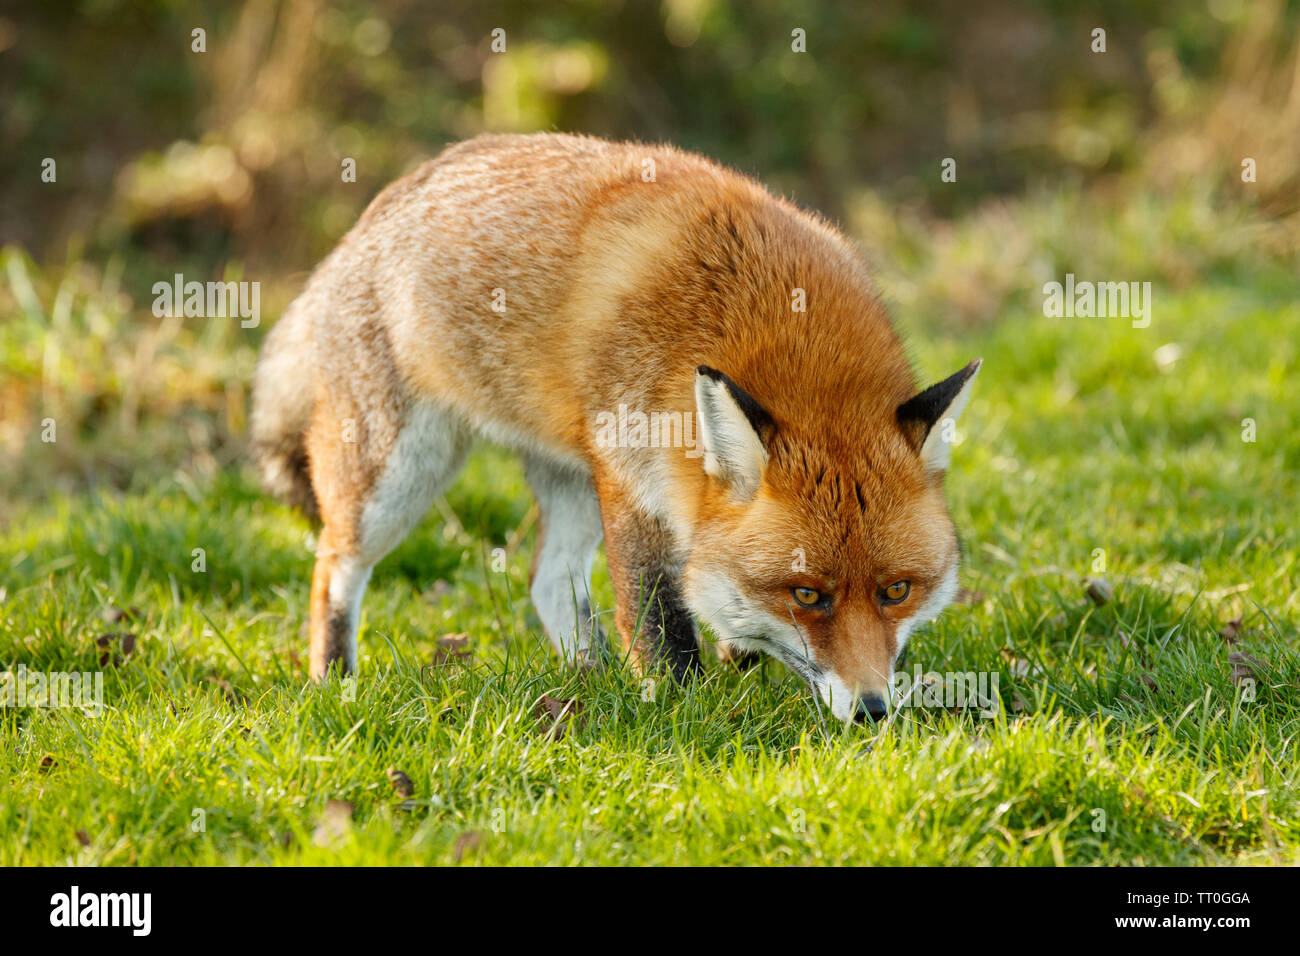 Rosso europeo volpe (Vulpes vulpes) Foto Stock